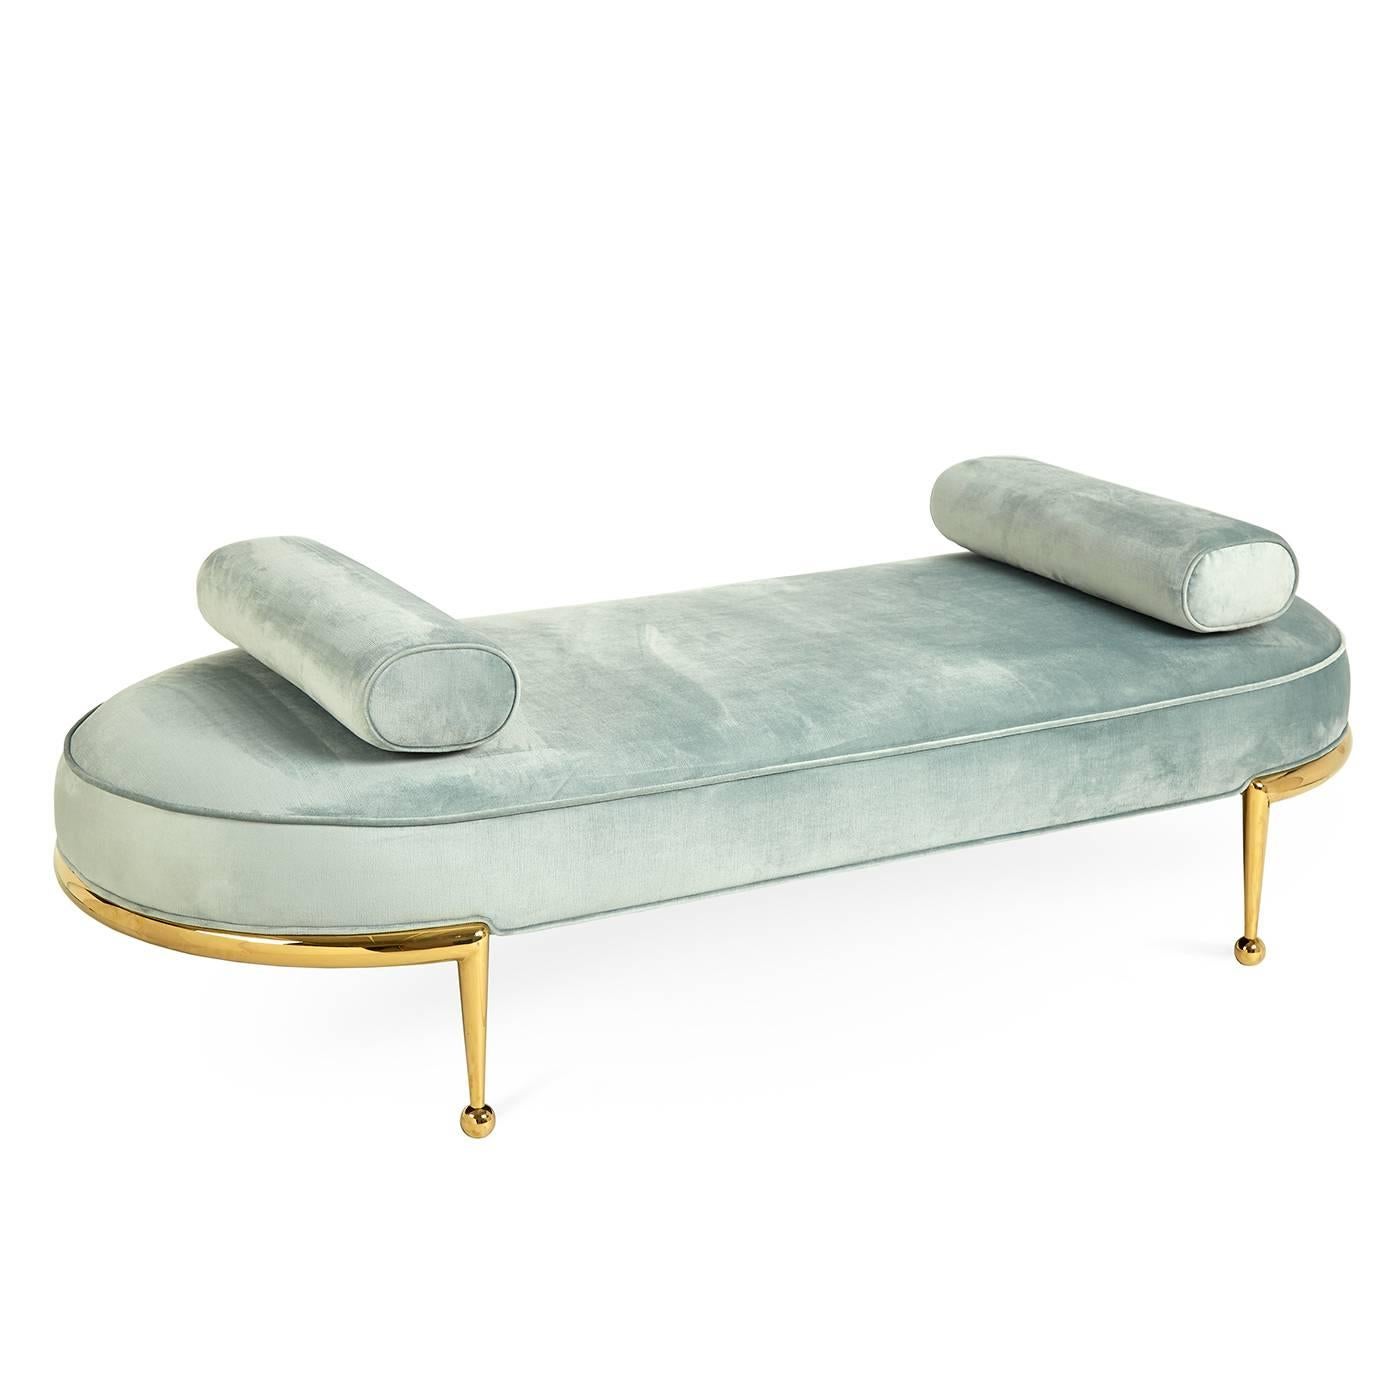 Power Player. An intriguingly sculptural brass base fitted with our signature sphere and cone legs cradles a lozenge-shaped seat upholstered in Bergamo Azure velvet. Weighted bolsters ensure you can recline without rolling over. Daybeds are every